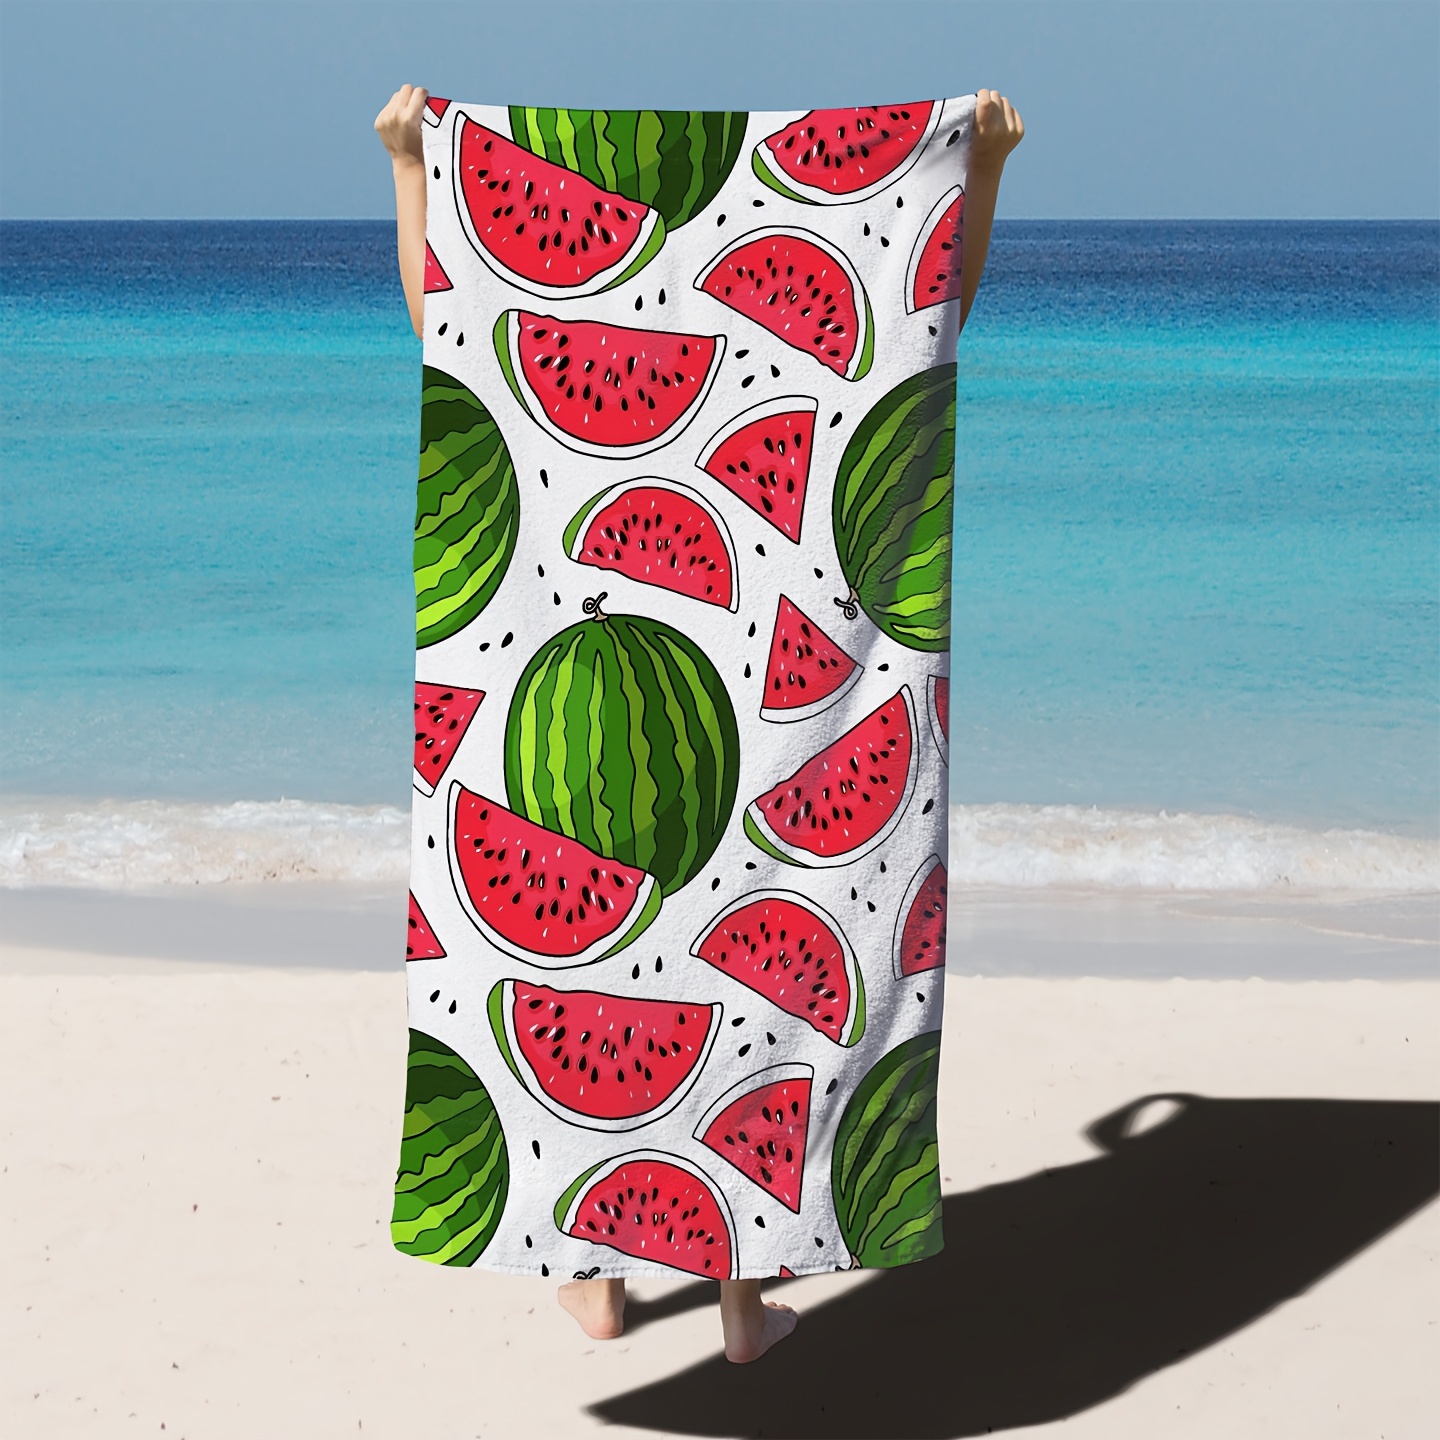 

1pc Summer Watermelon Print Beach Towel - High Absorbency, Super Soft, Machine Washable, Perfect For Travel, Swimming, Diving, Surfing, Yoga, Camping, Beach Essentials